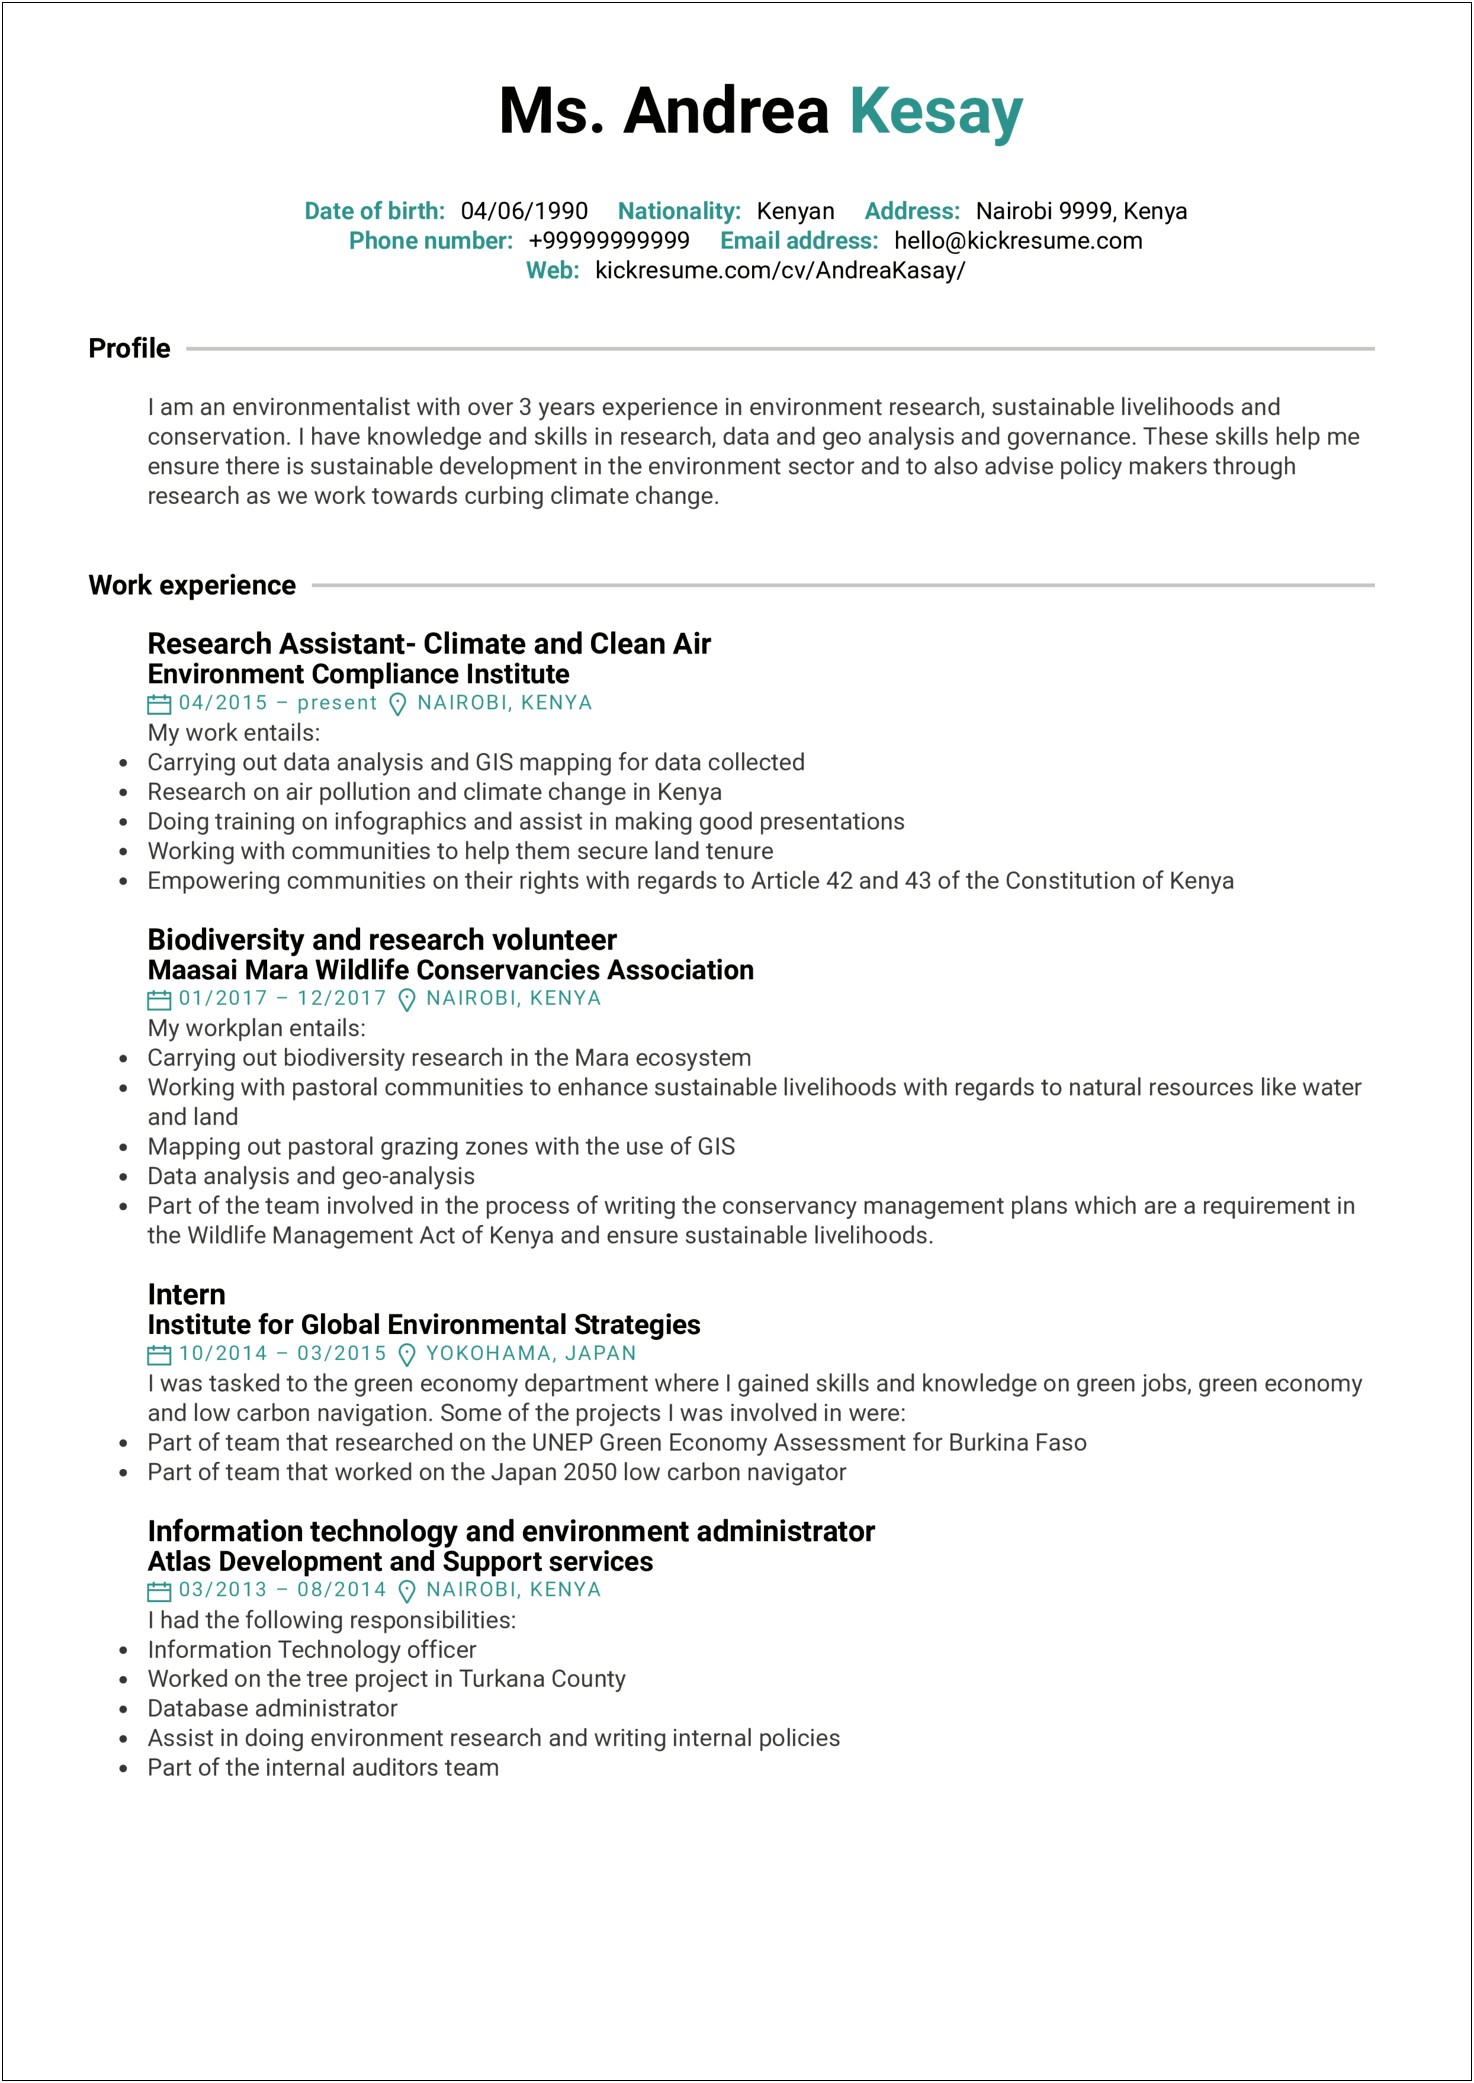 Research Assistant Sample Resume Responsibilities